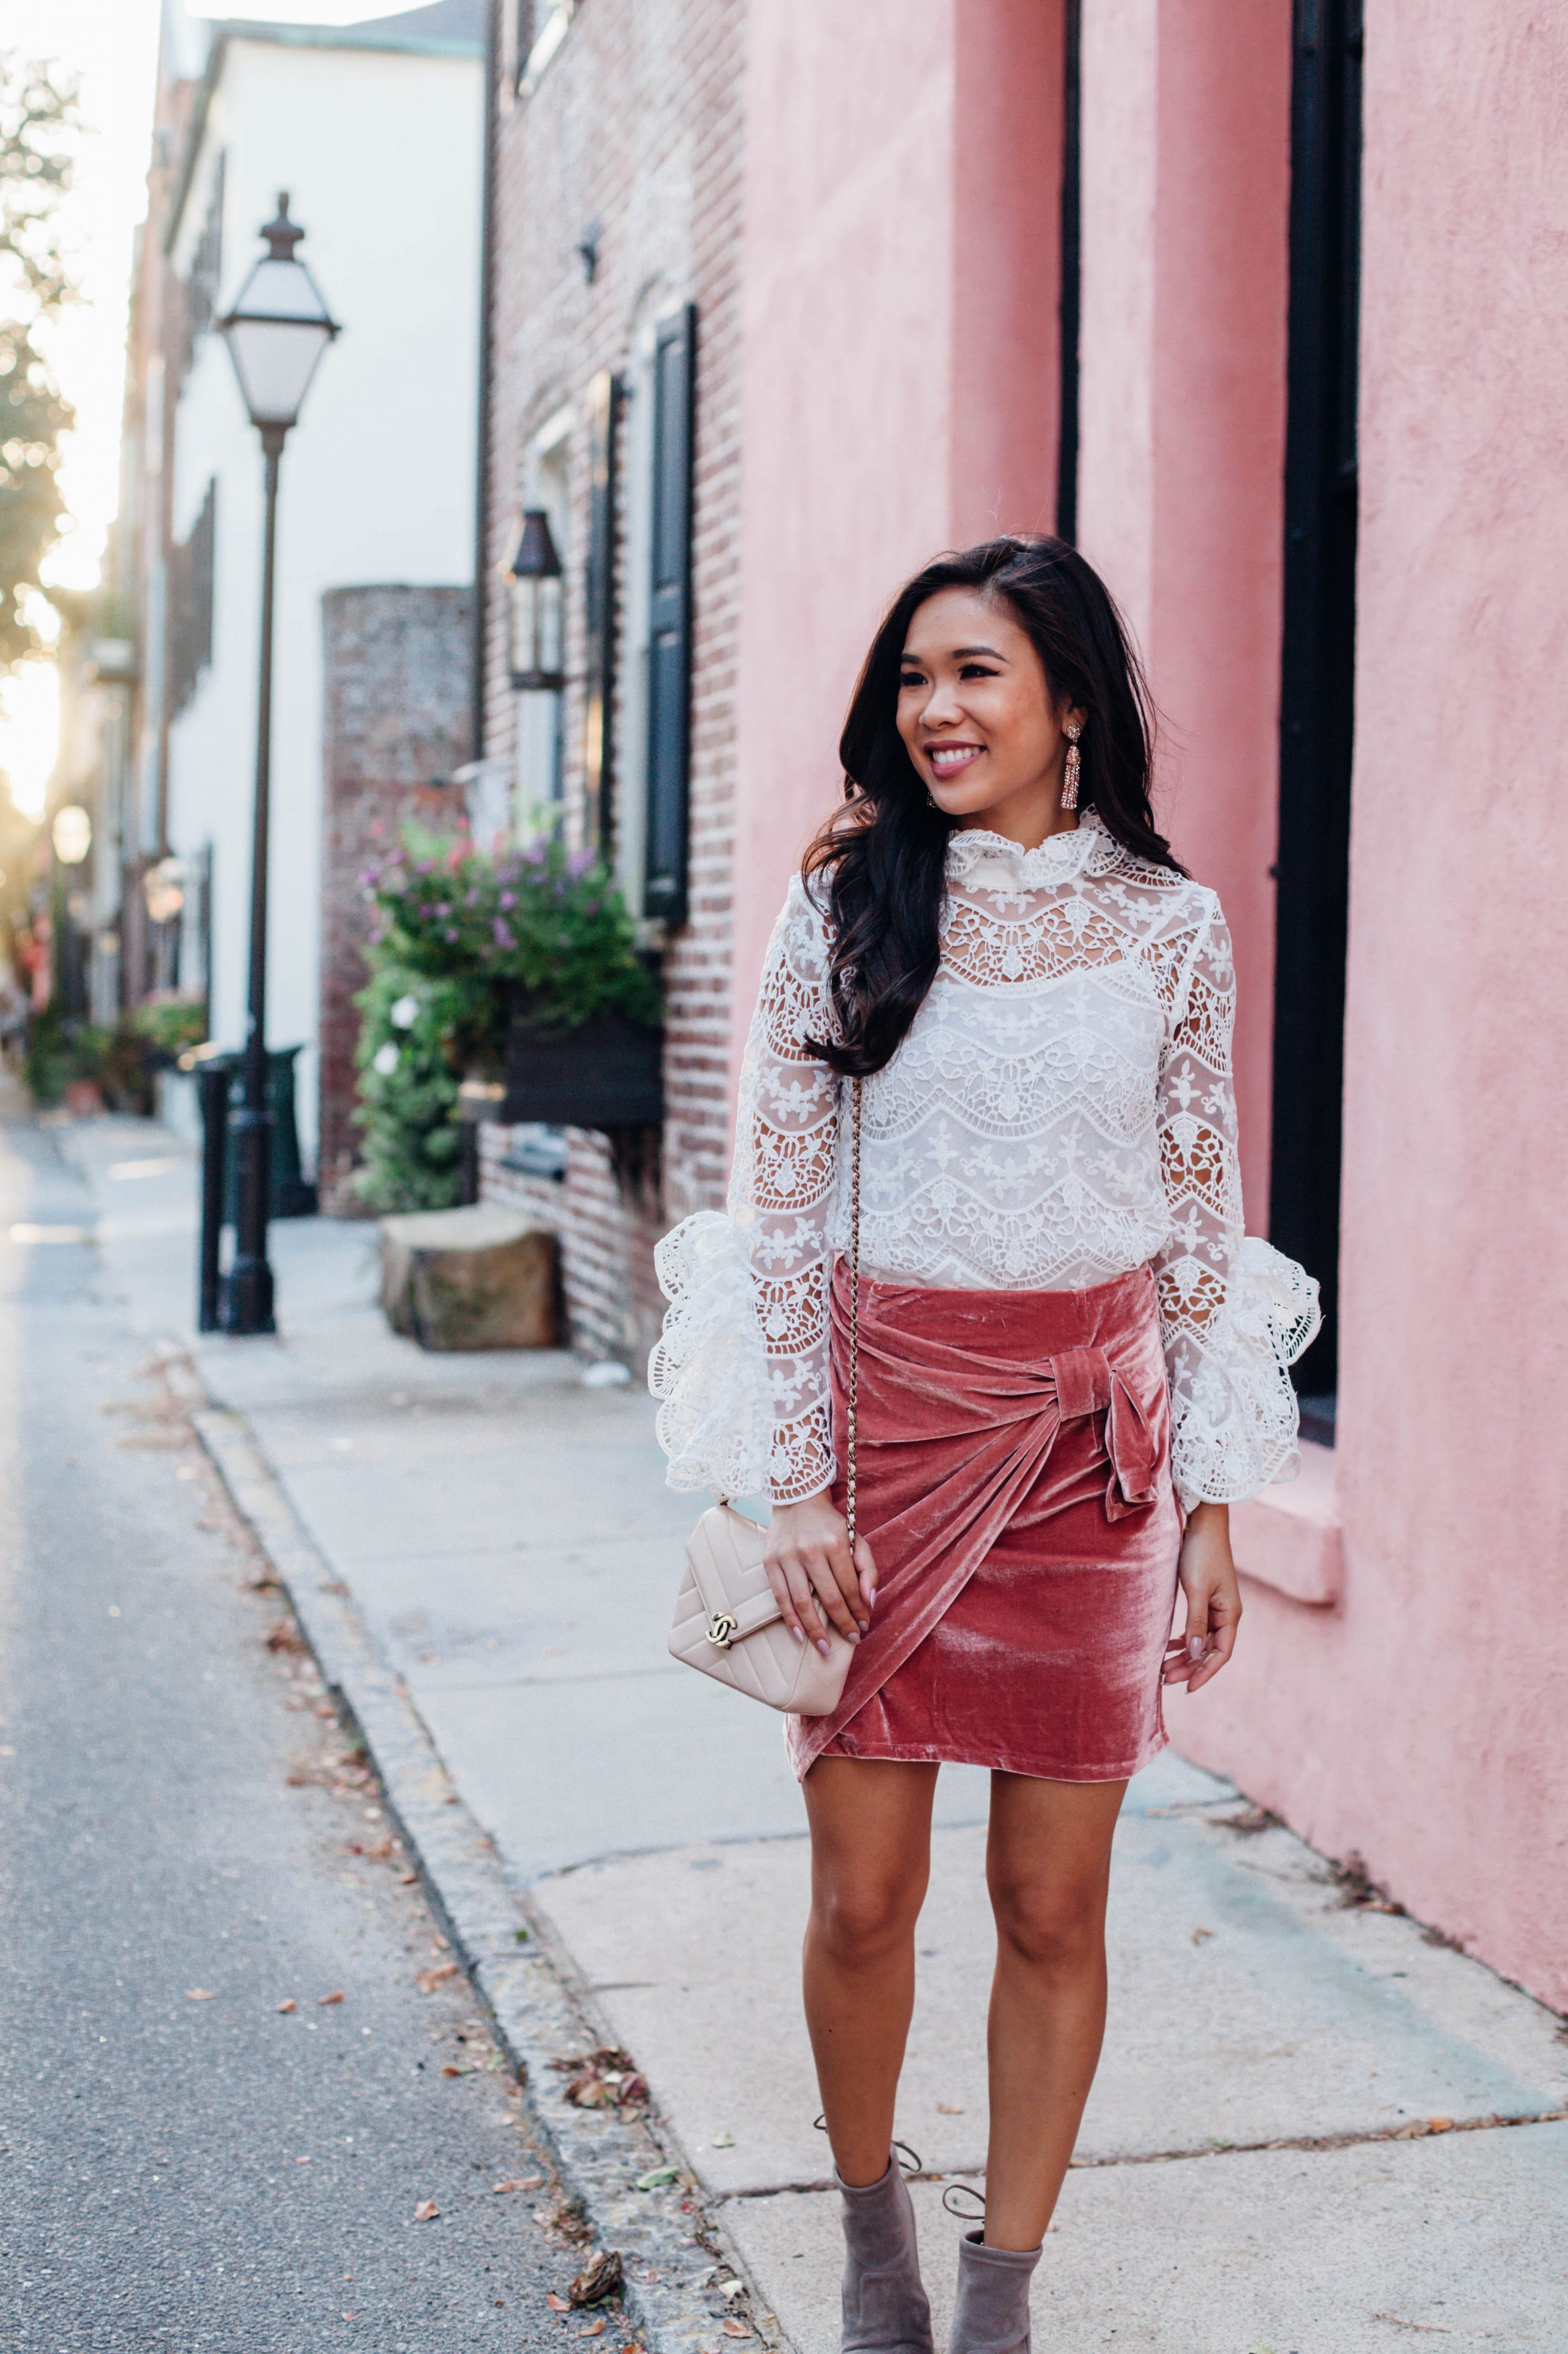 Lace crochet blouse and pink velvet skirt with Chanel bag